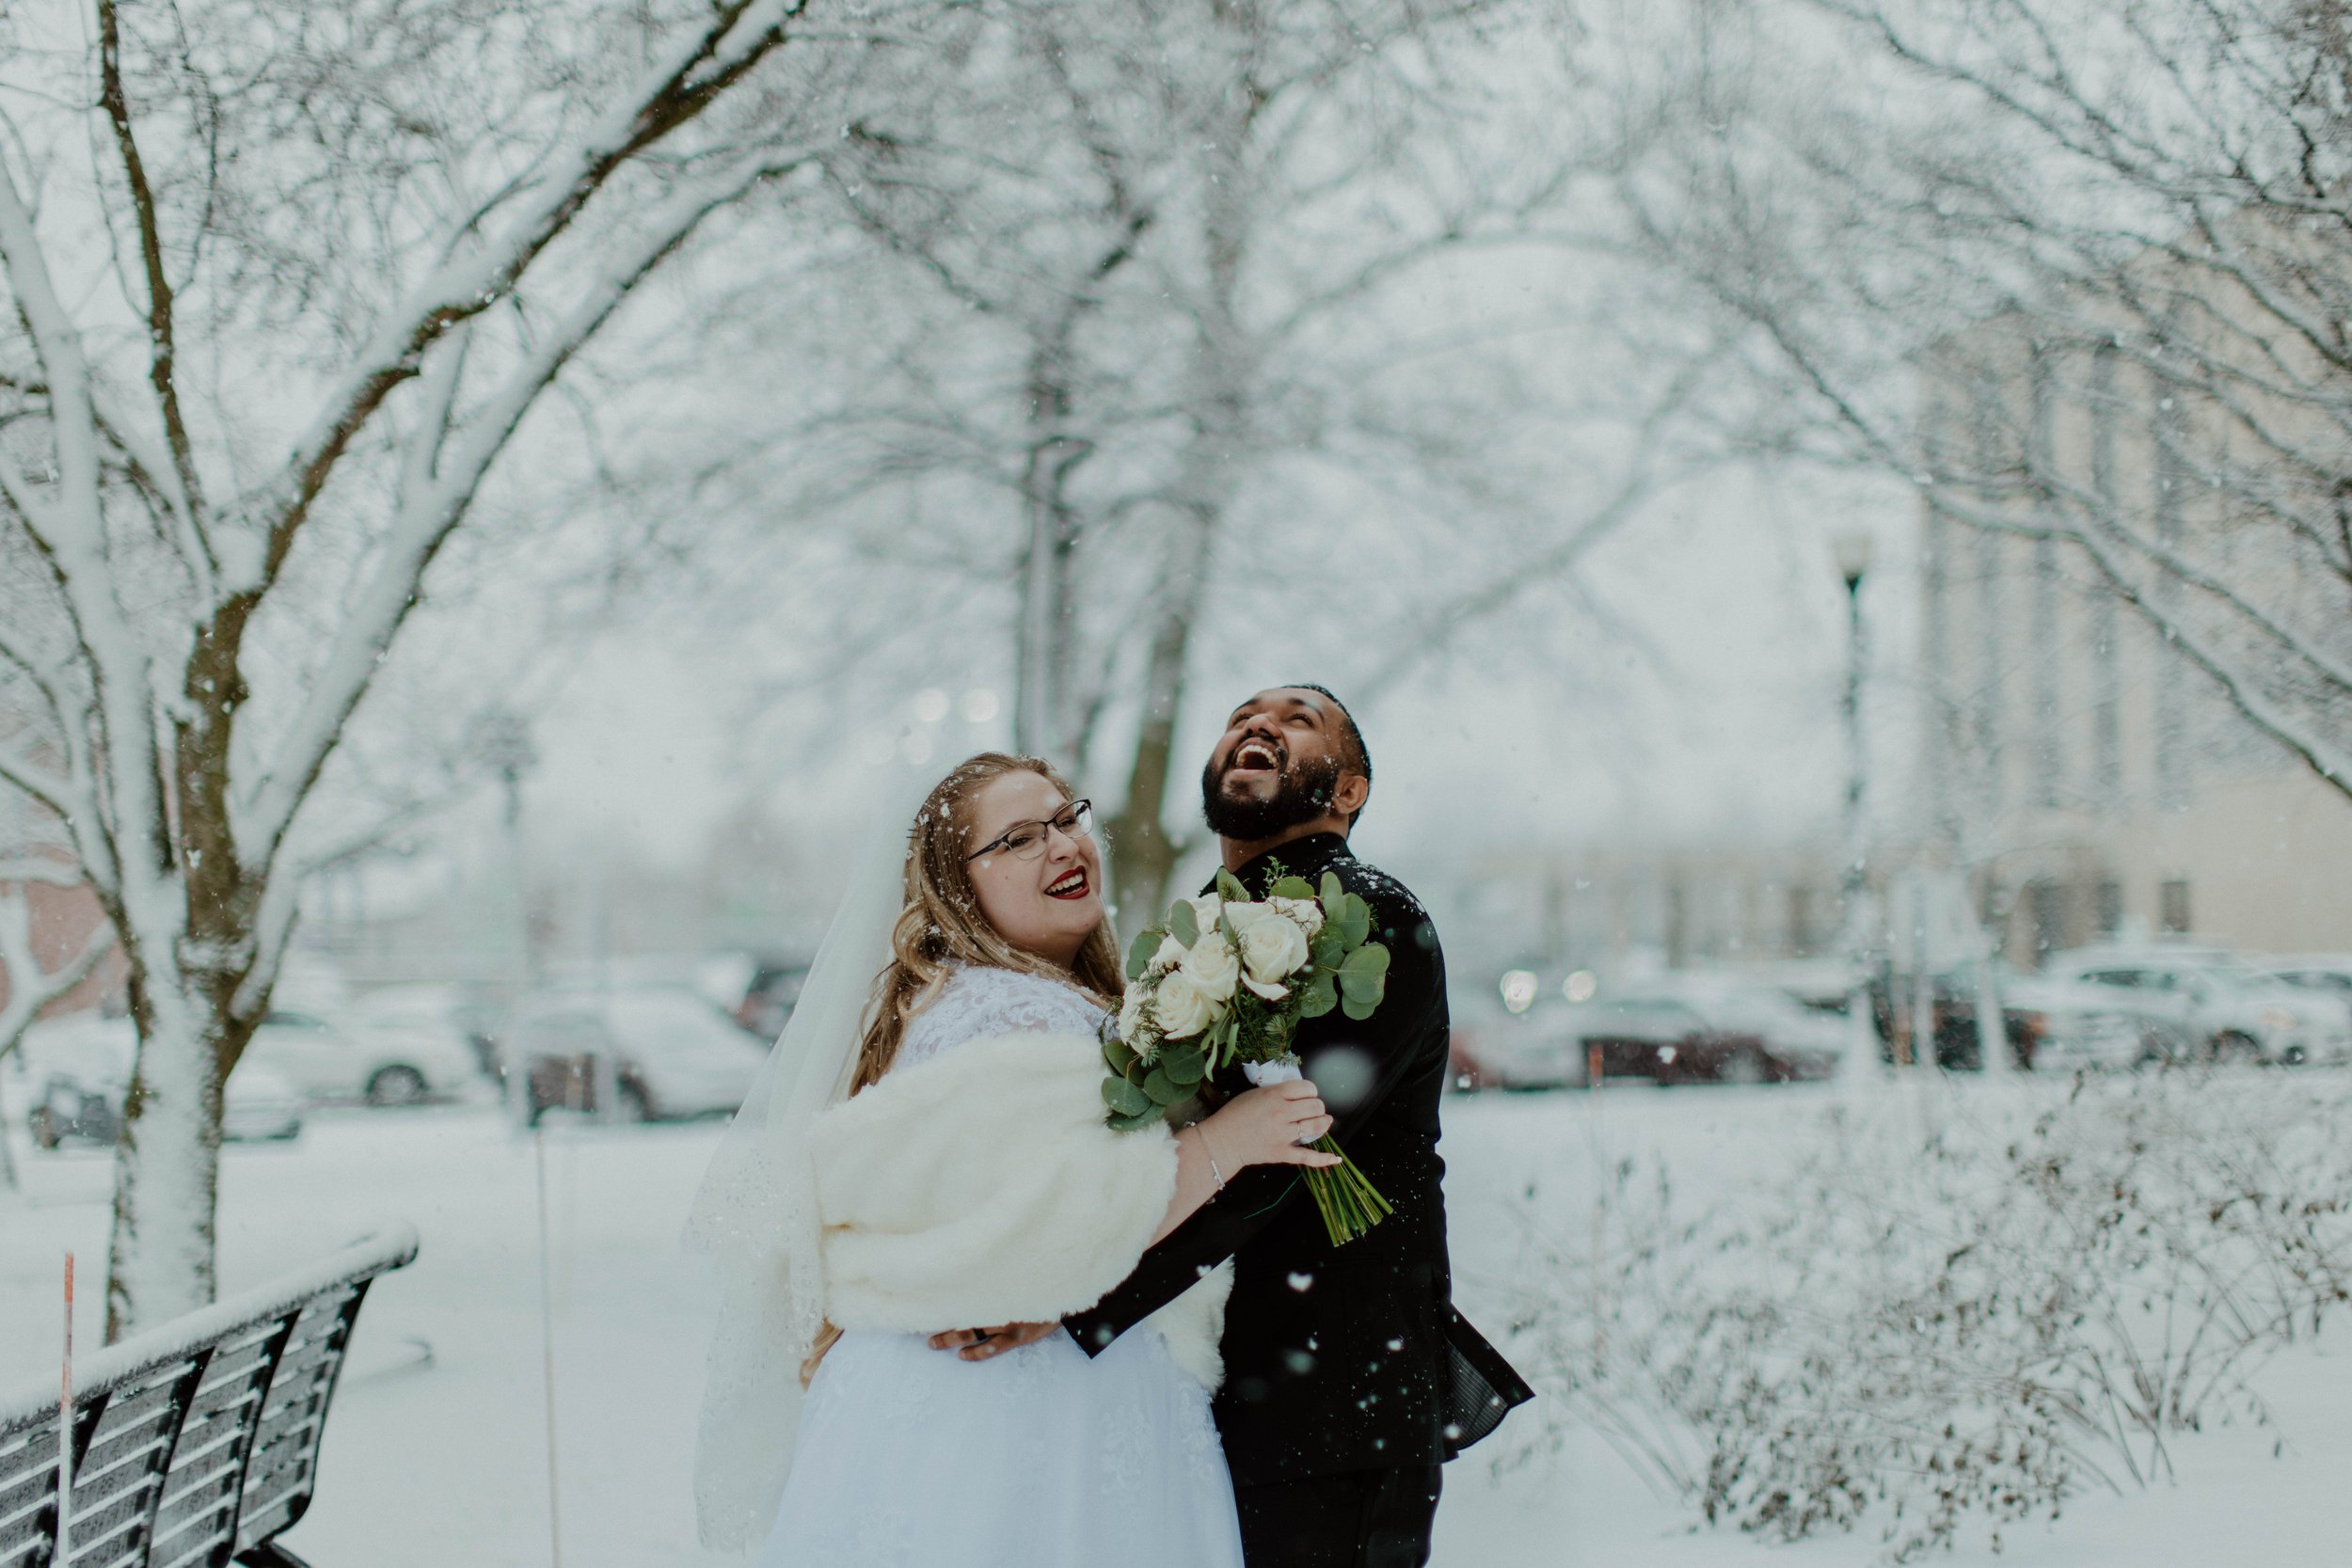 Newlyweds hold each other and laugh with snow falling around them